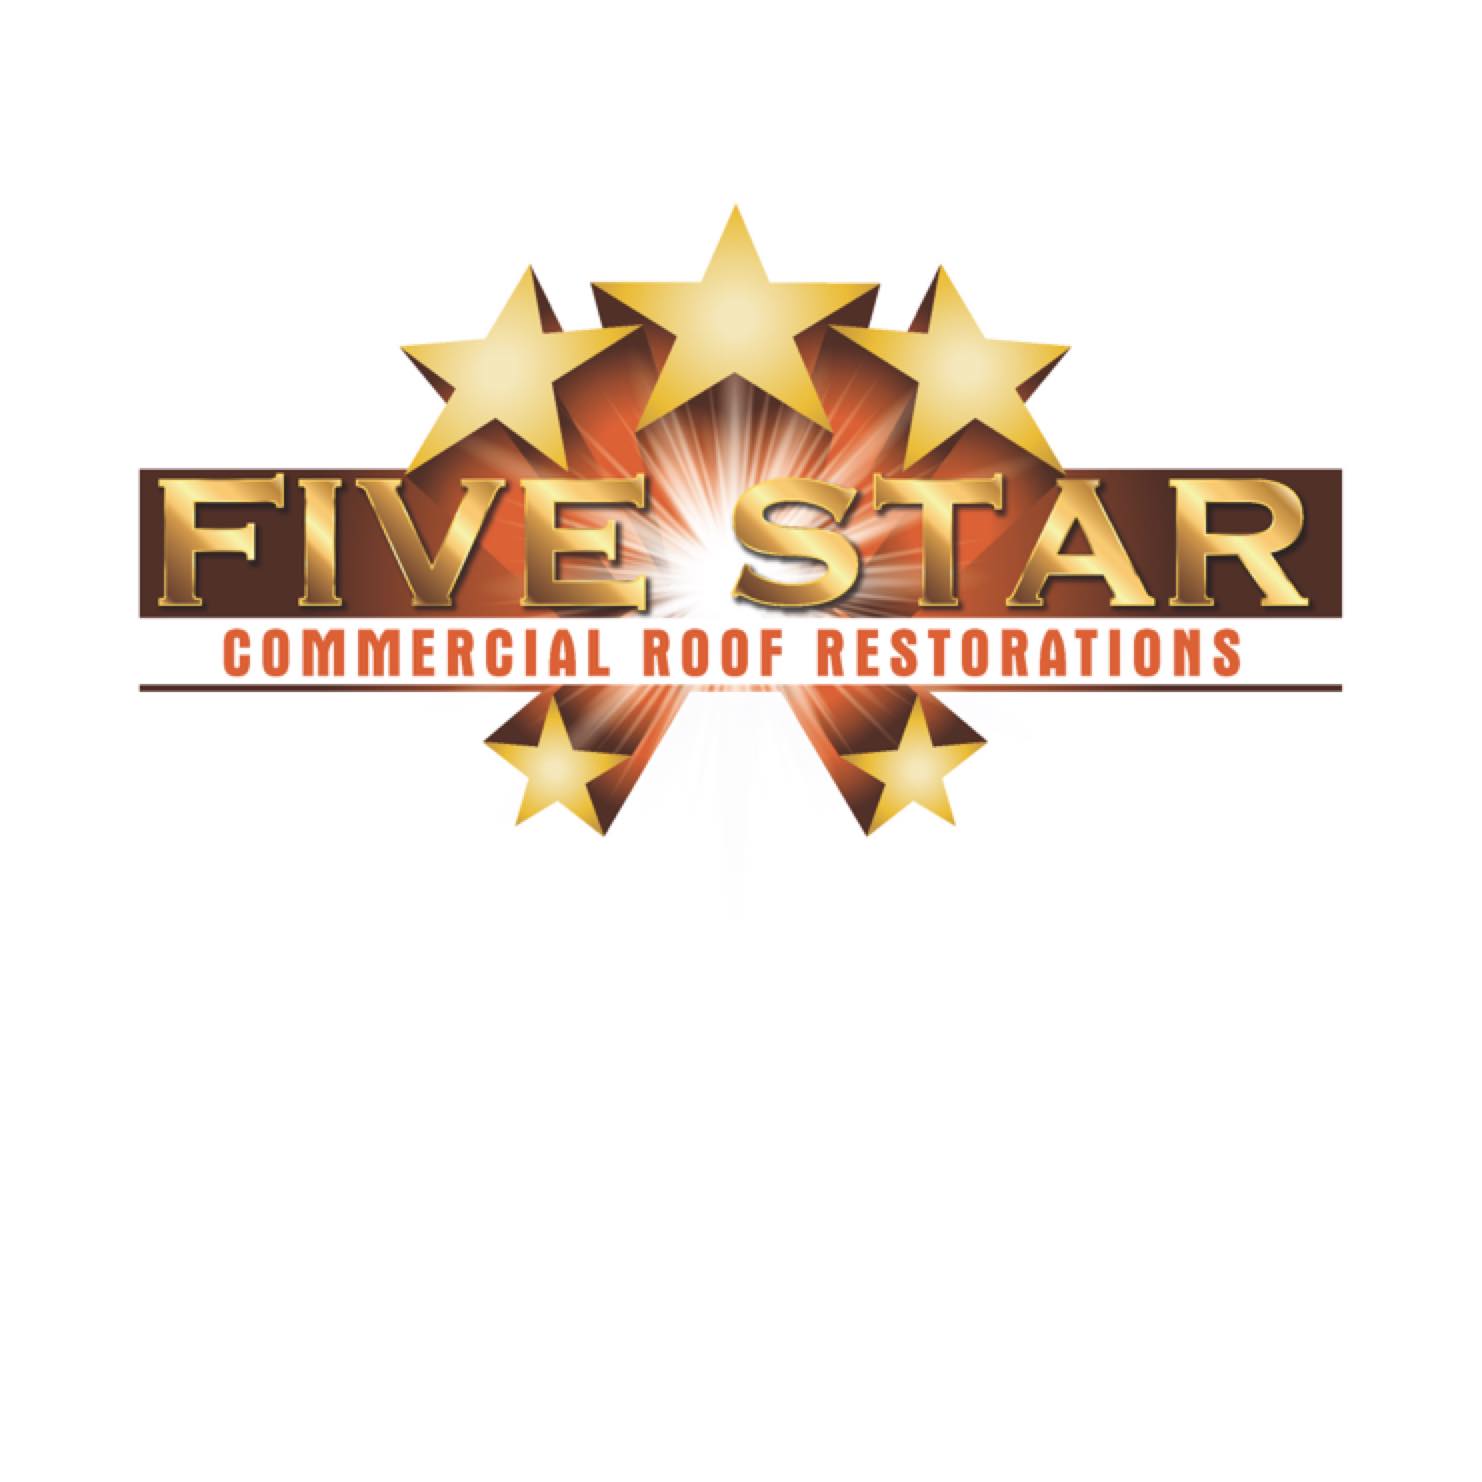 Five Star Commercial Roof Restoration 1315 Valley Rd, Quarryville Pennsylvania 17566